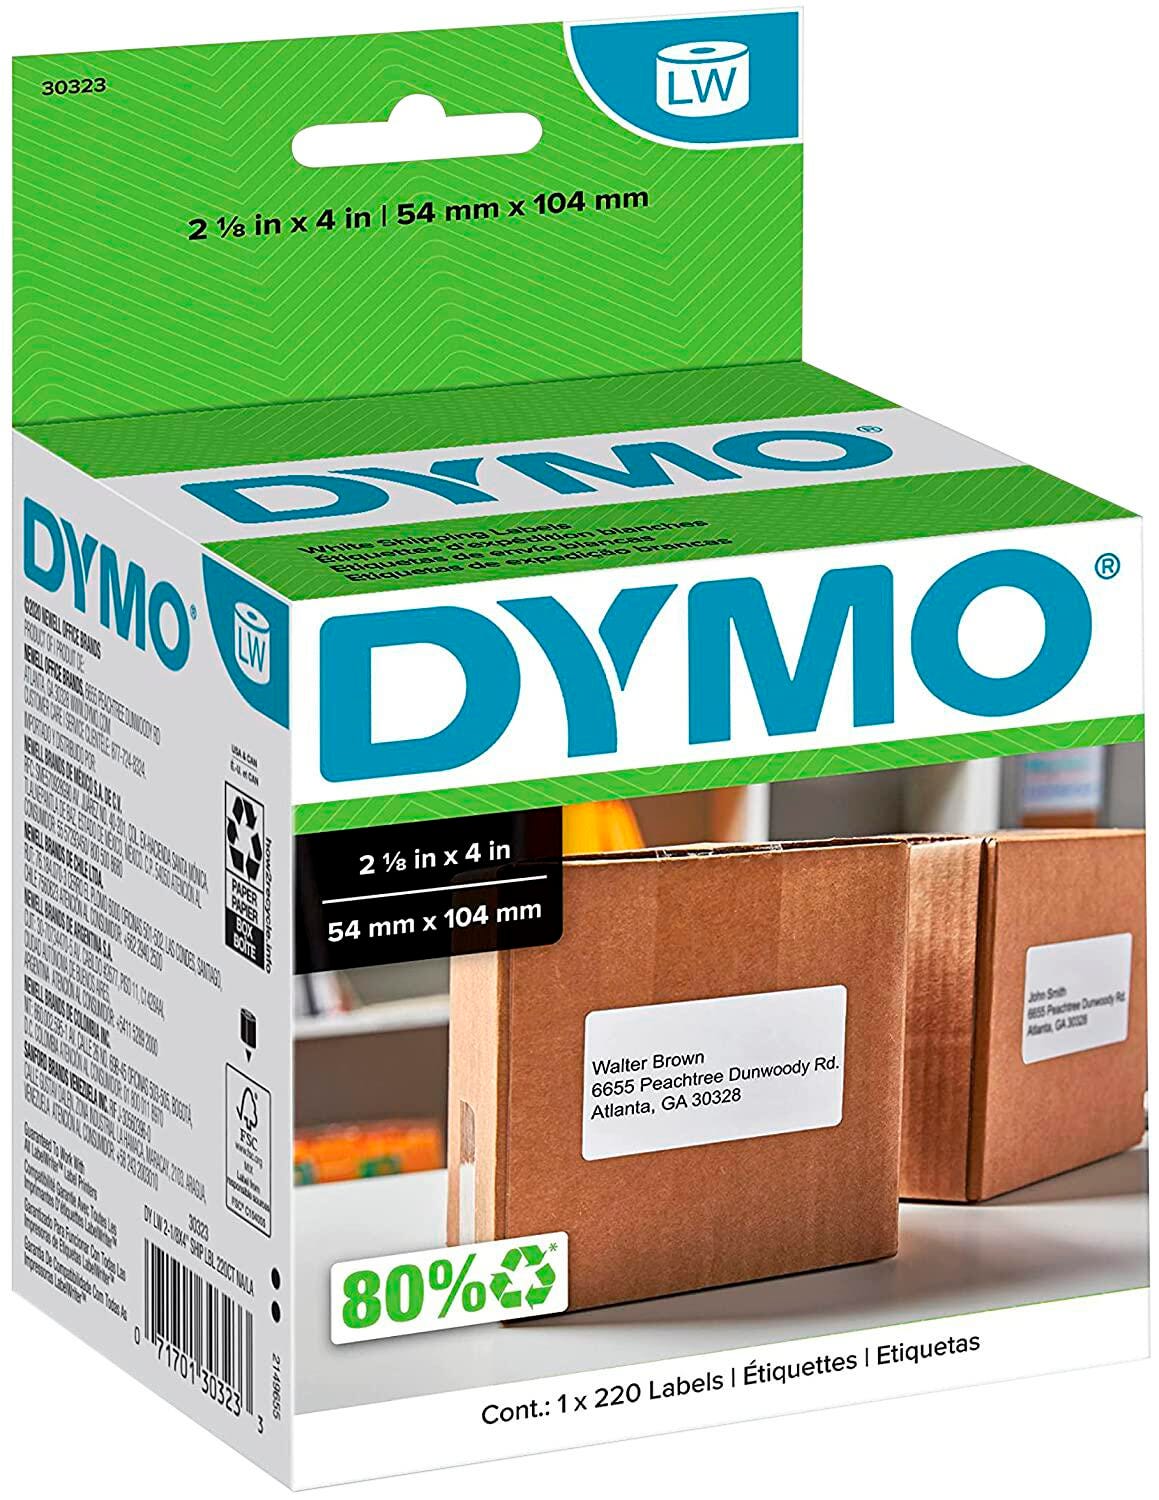 DYMO LabelWriter Shipping Labels, 2-1/8 x 4 Inches, White, Roll of 220 Labels